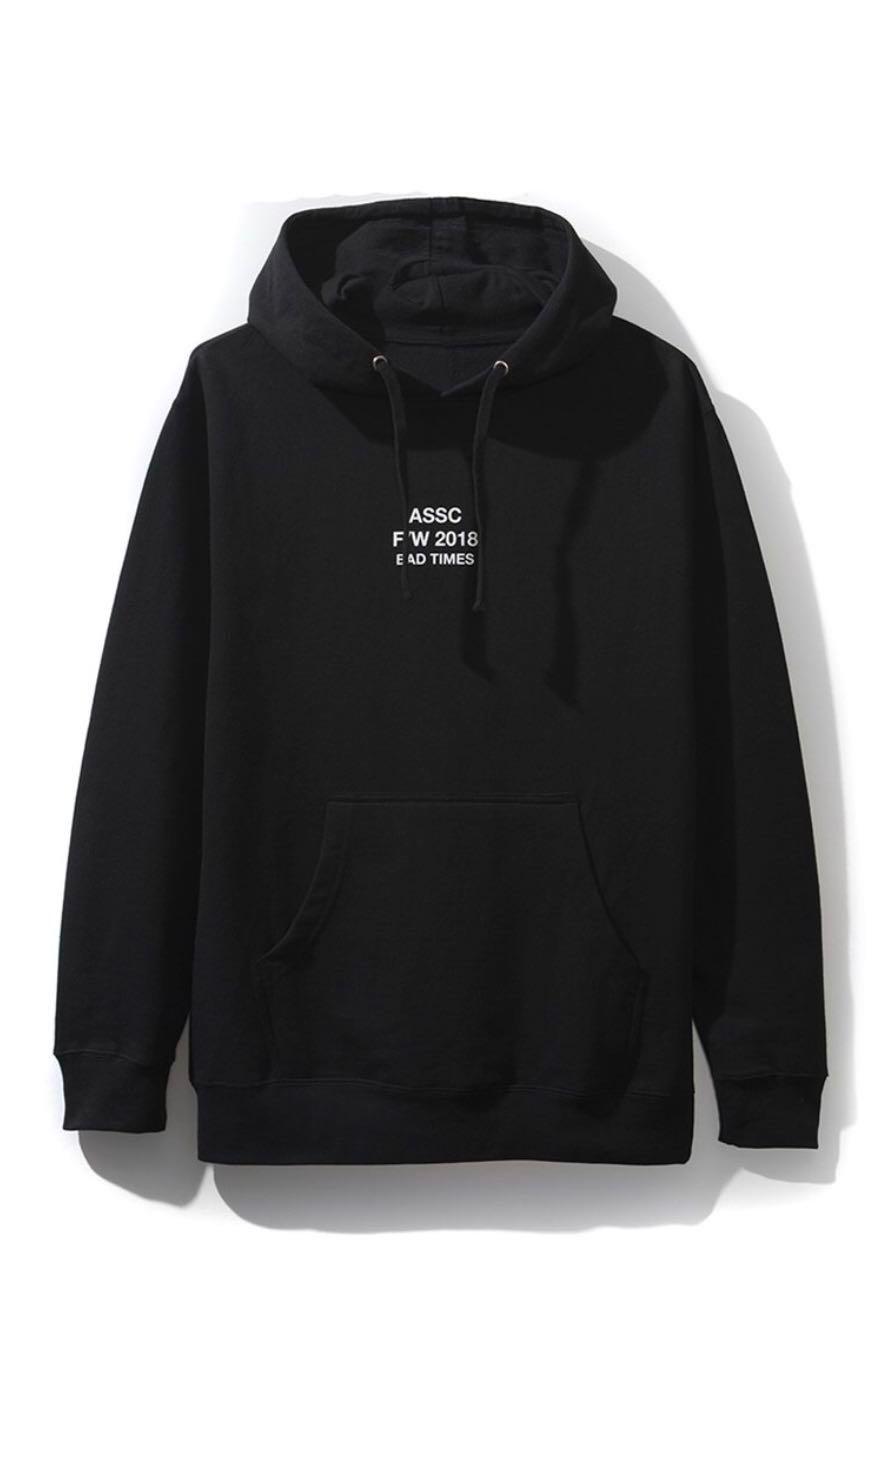 ASSC Bad Times Hoodie, Men's Fashion, Tops & Sets, Hoodies on ...